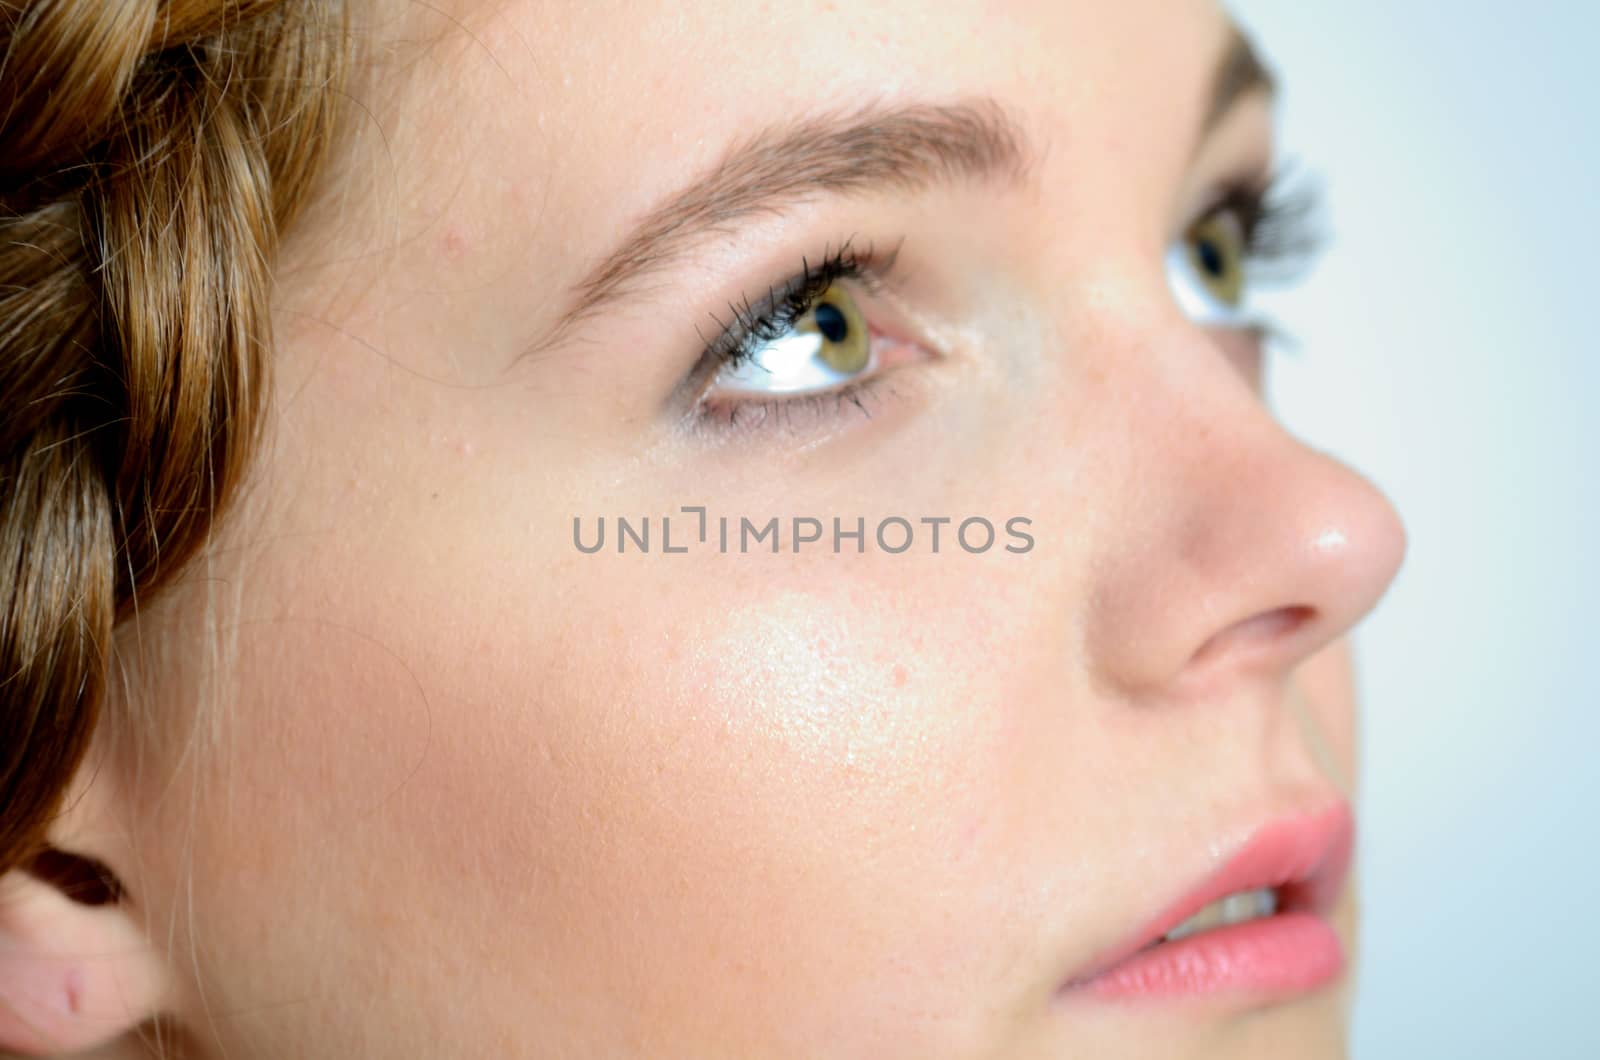 Closeup photo of face. Young female model with gentle face expression.